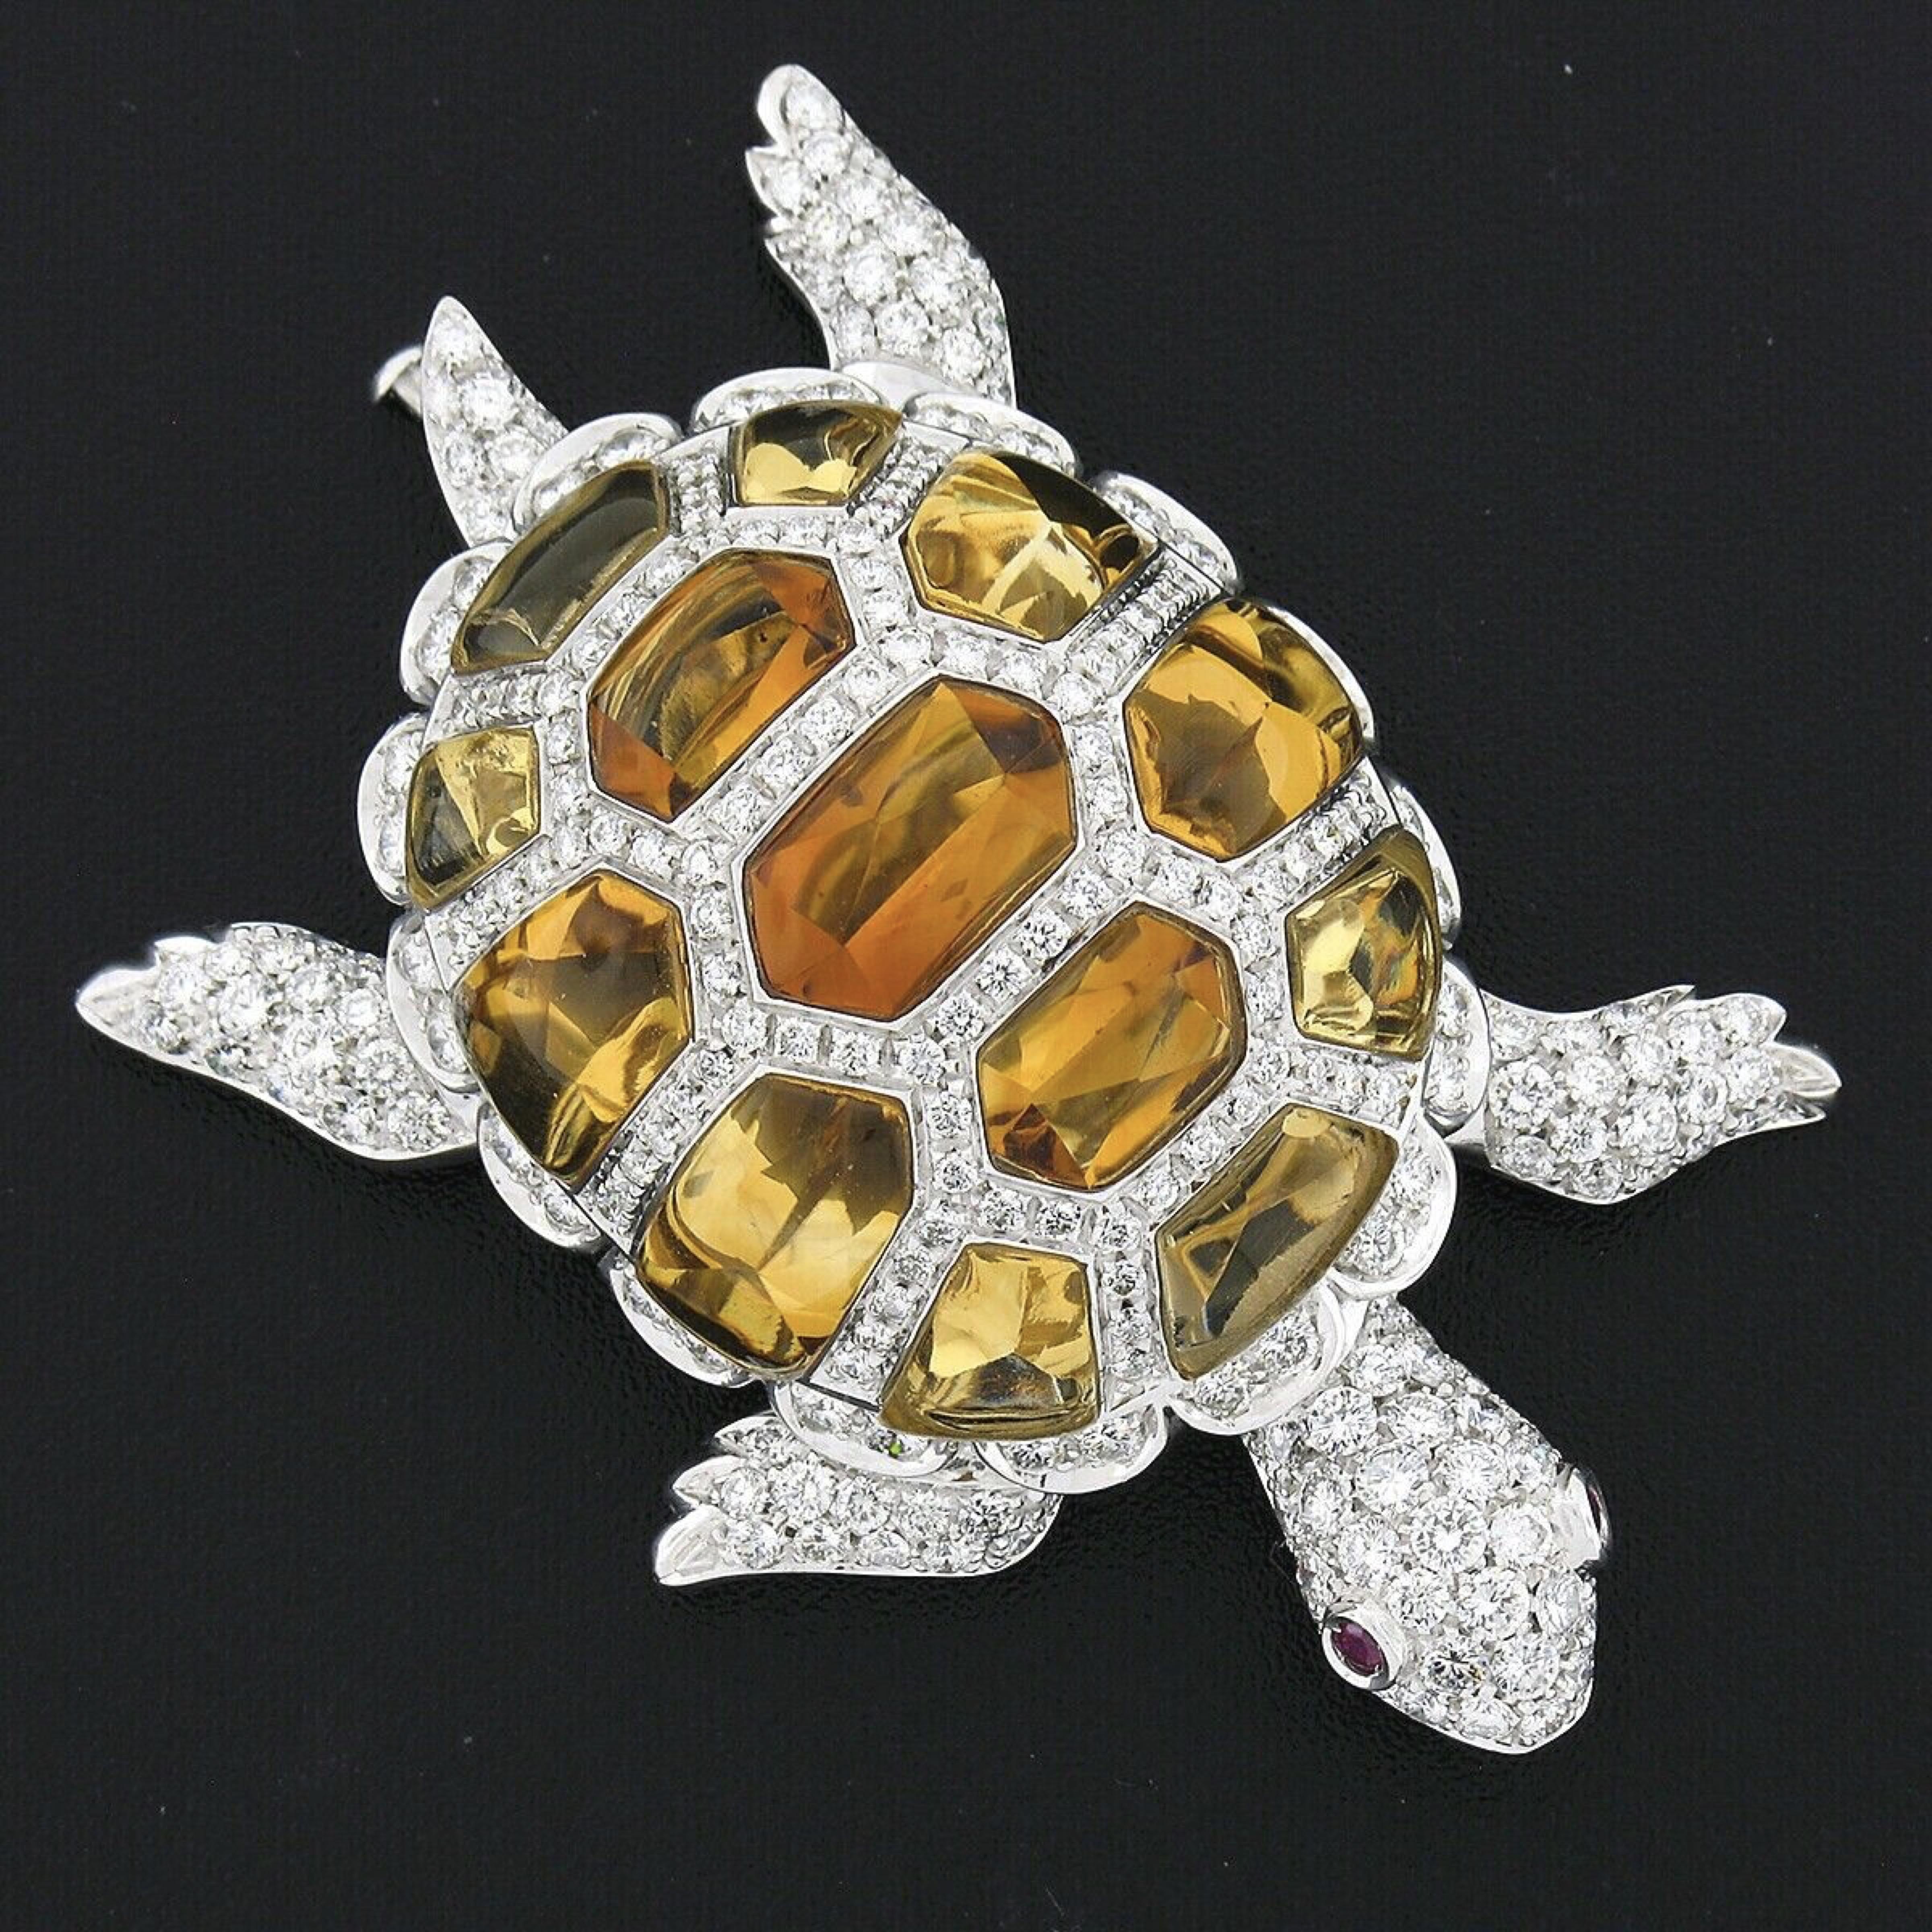 Here we have an absolutely breathtaking statement pin brooch designed by Garavelli that was crafted in Italy from solid 18k white gold. This magnificent and exceptionally well made piece features a large, highly detailed, turtle design with its